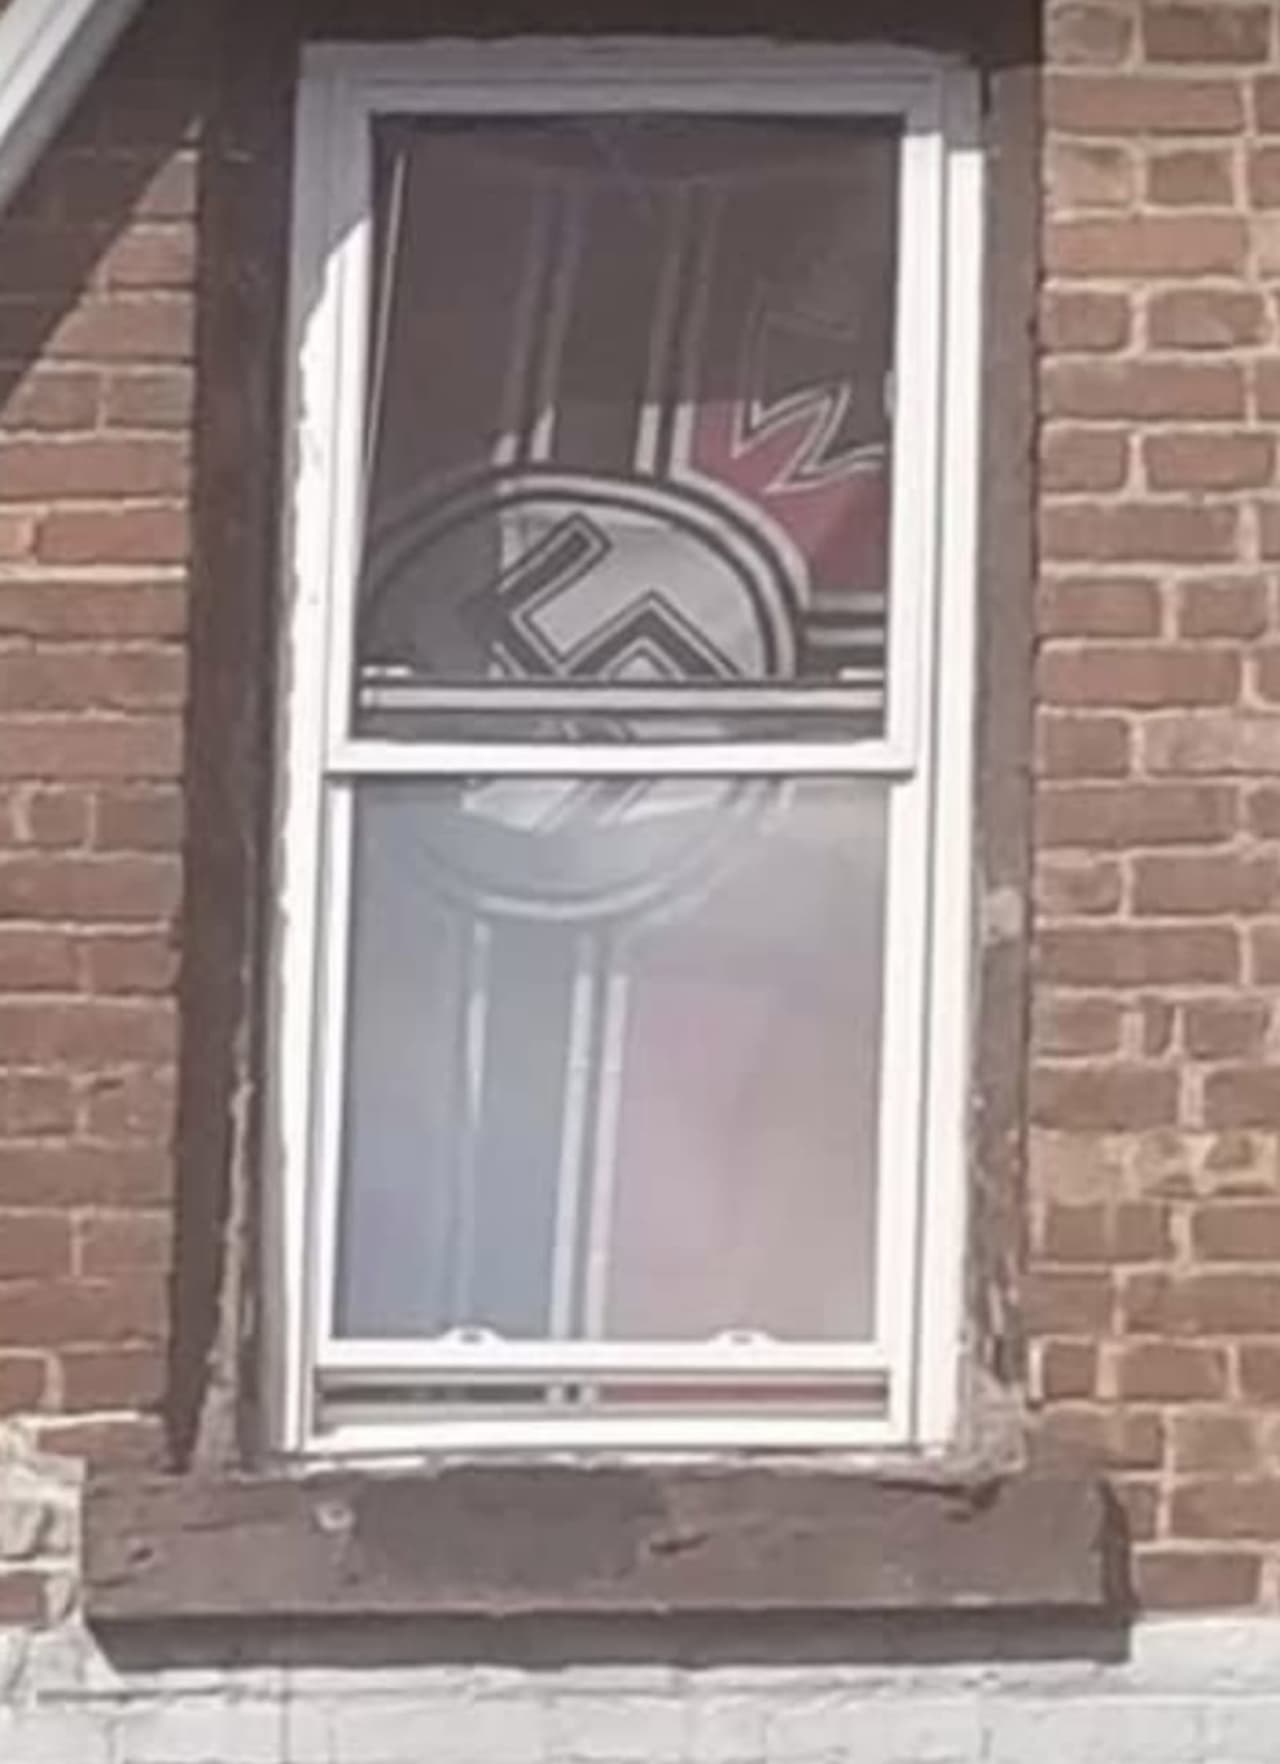 The Nazi flag that was hanging in a Poughkeepsie window.